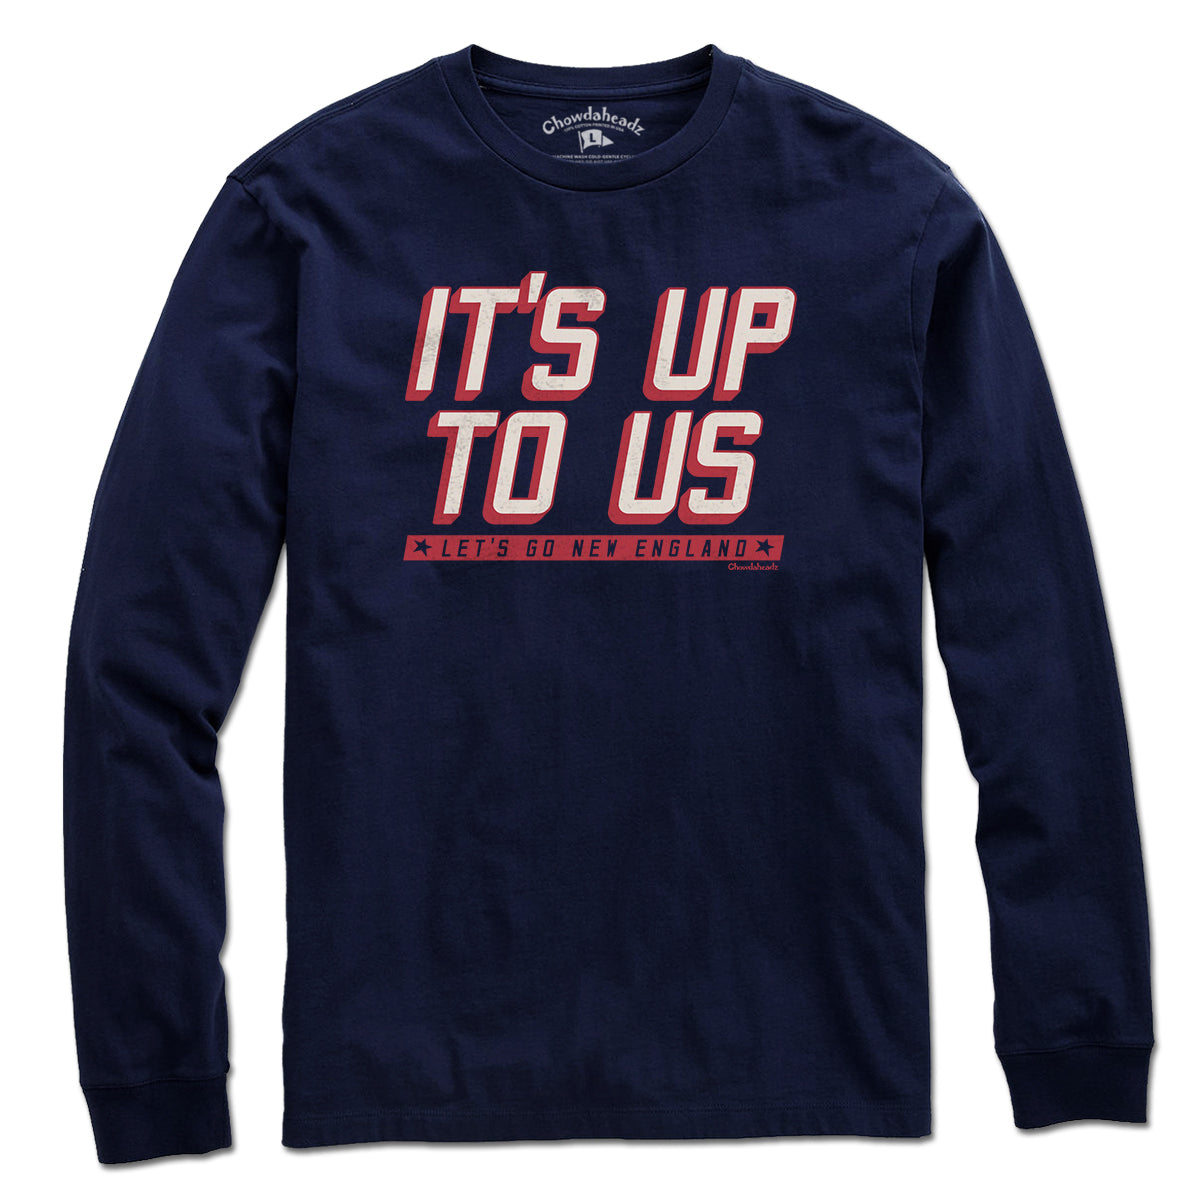 It's Up To Us New England T-Shirt - Chowdaheadz